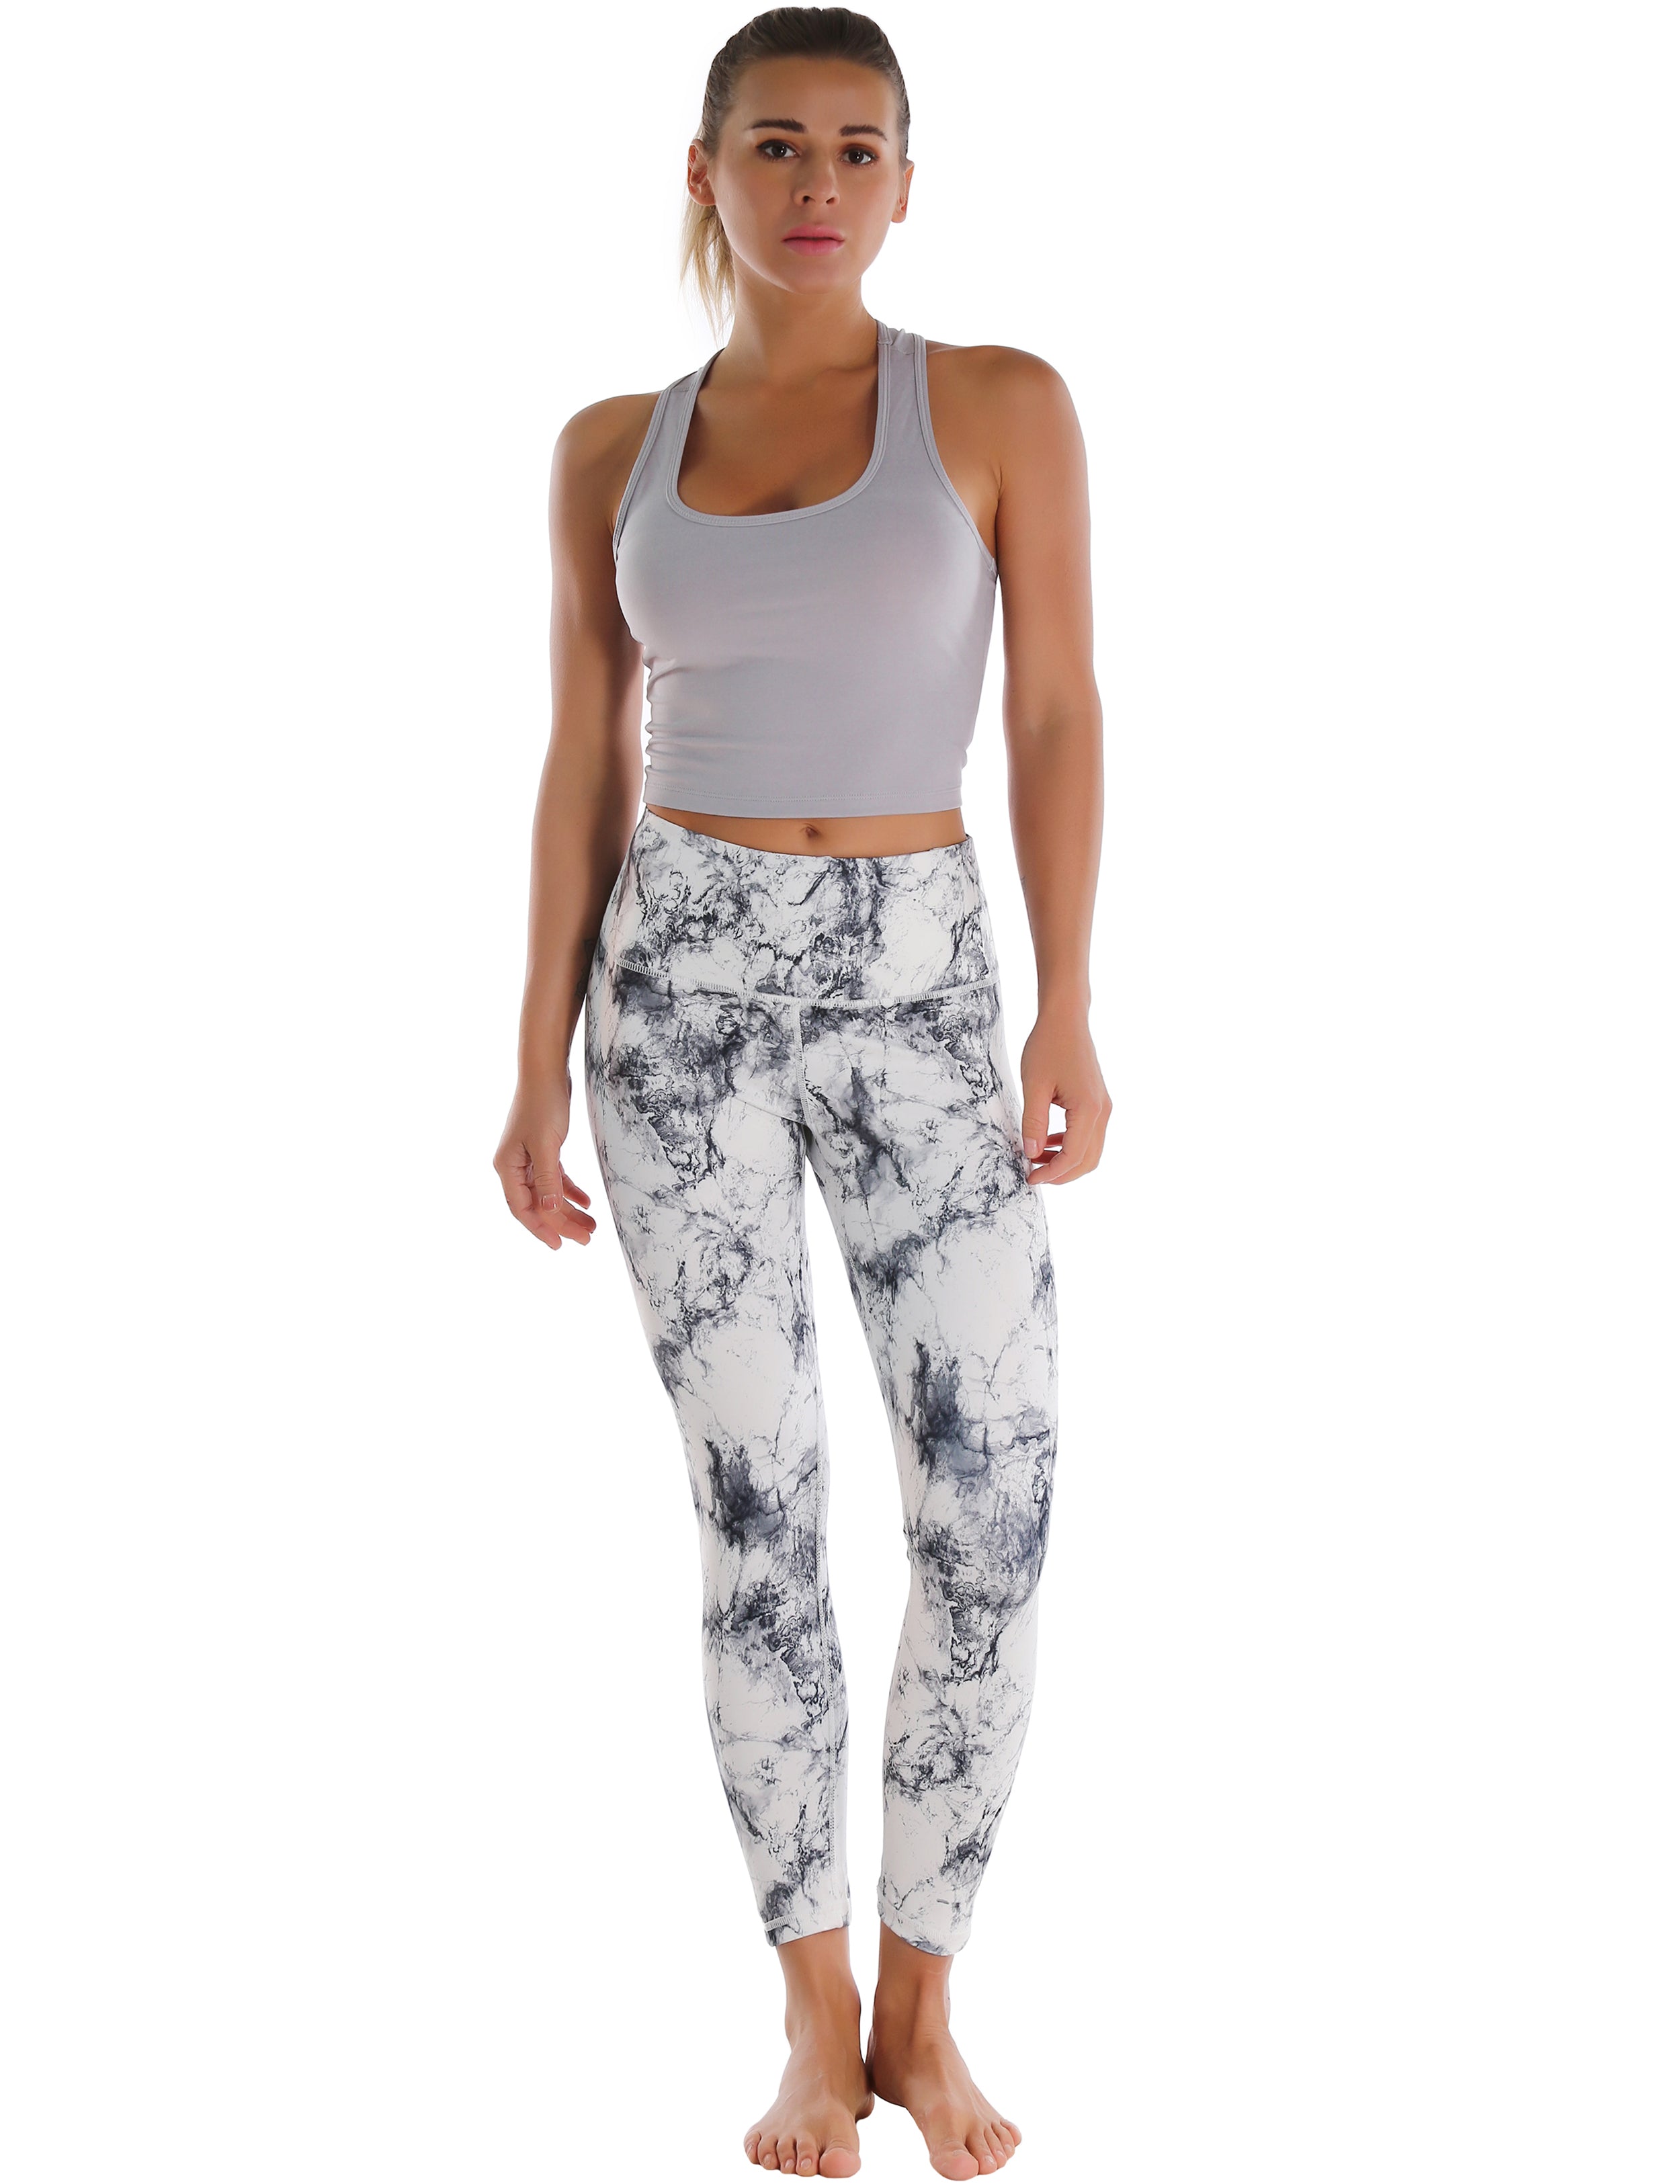 22" High Waist Crop Tight Capris arabescato 82%Polyester/18%Spandex Fabric doesn't attract lint easily 4-way stretch No see-through Moisture-wicking Tummy control Inner pocket